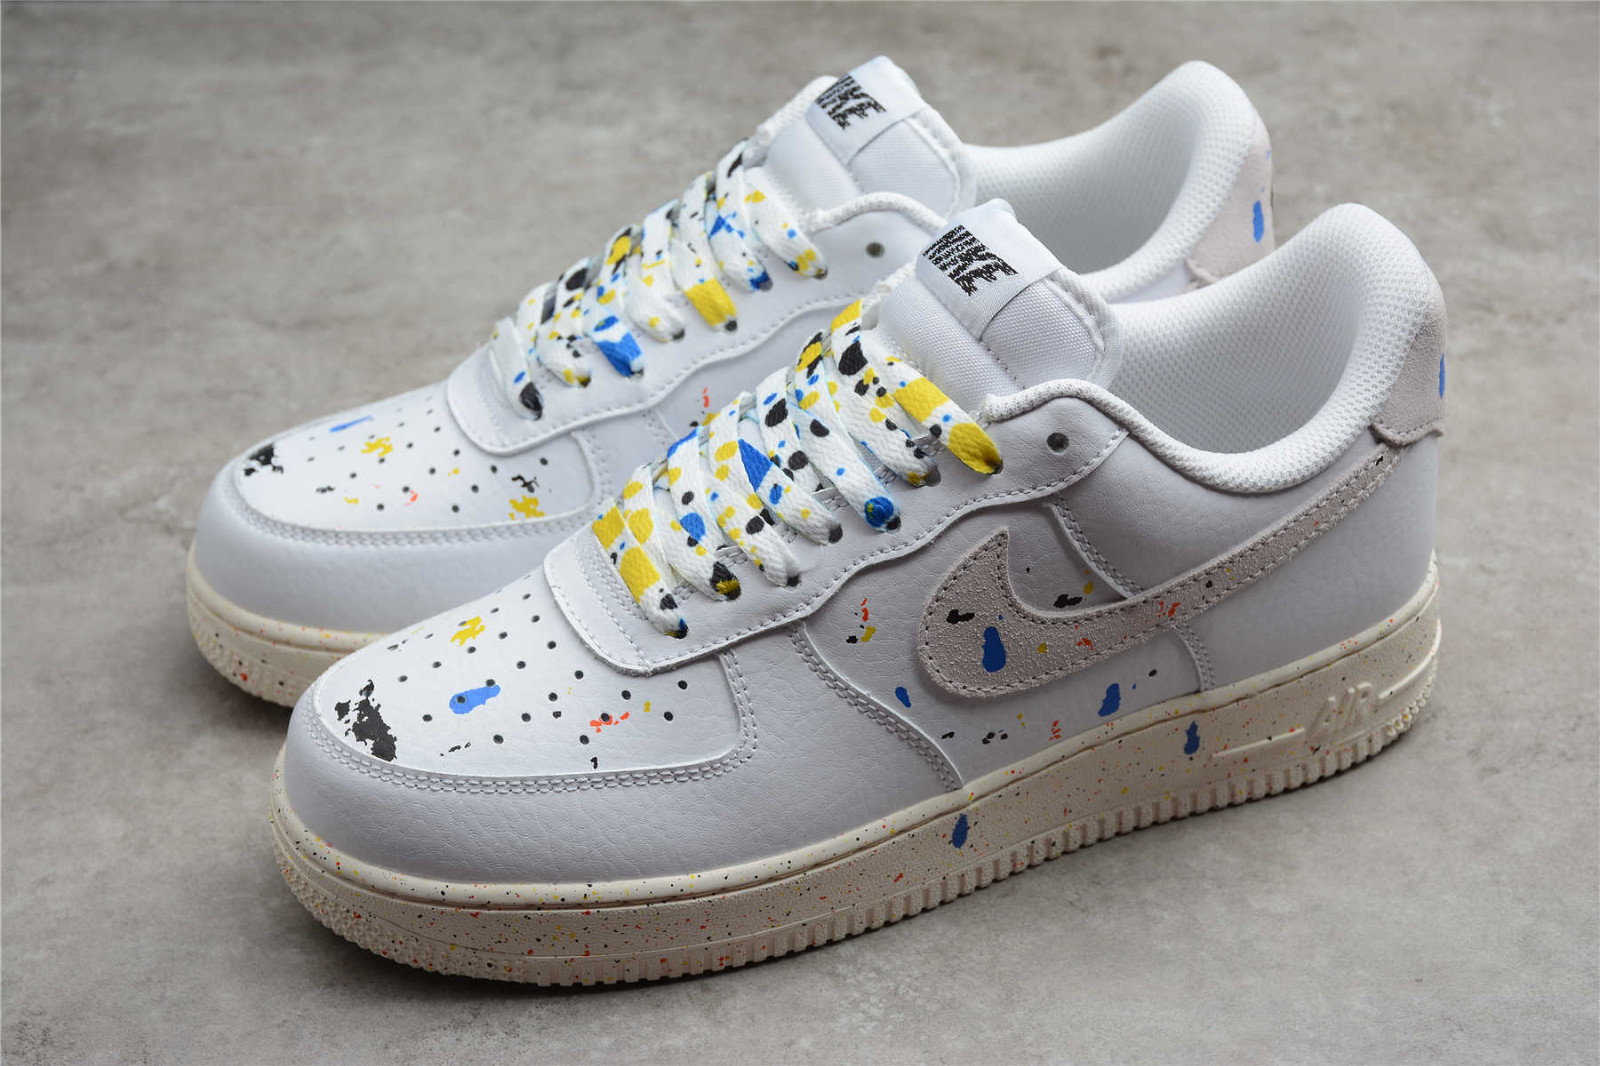 NIKE AIR FORCE 1 LOW '07 LV8 BROOKLYN PAINT SPLATTER for £135.00